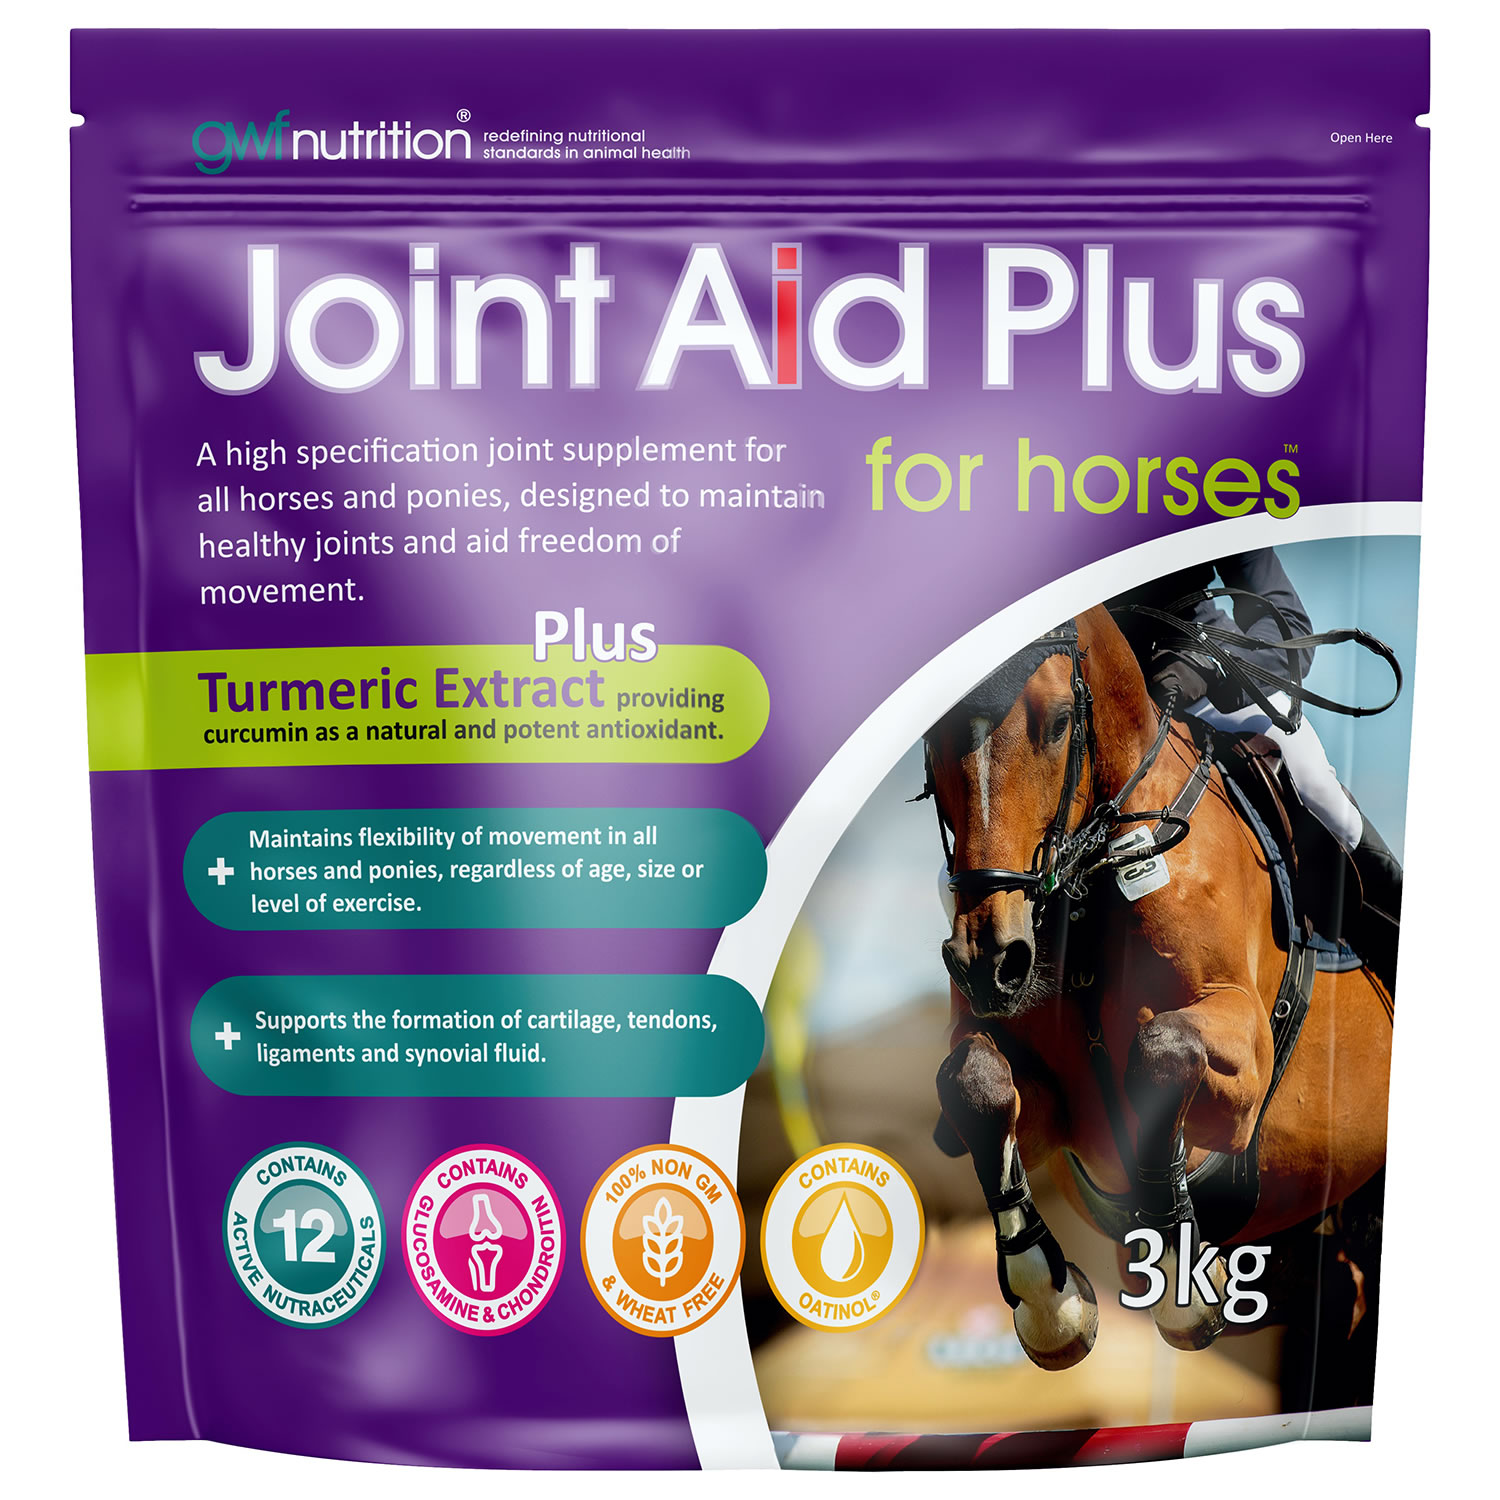 GWF JOINT AID PLUS FOR HORSES 3 KG 3 KG